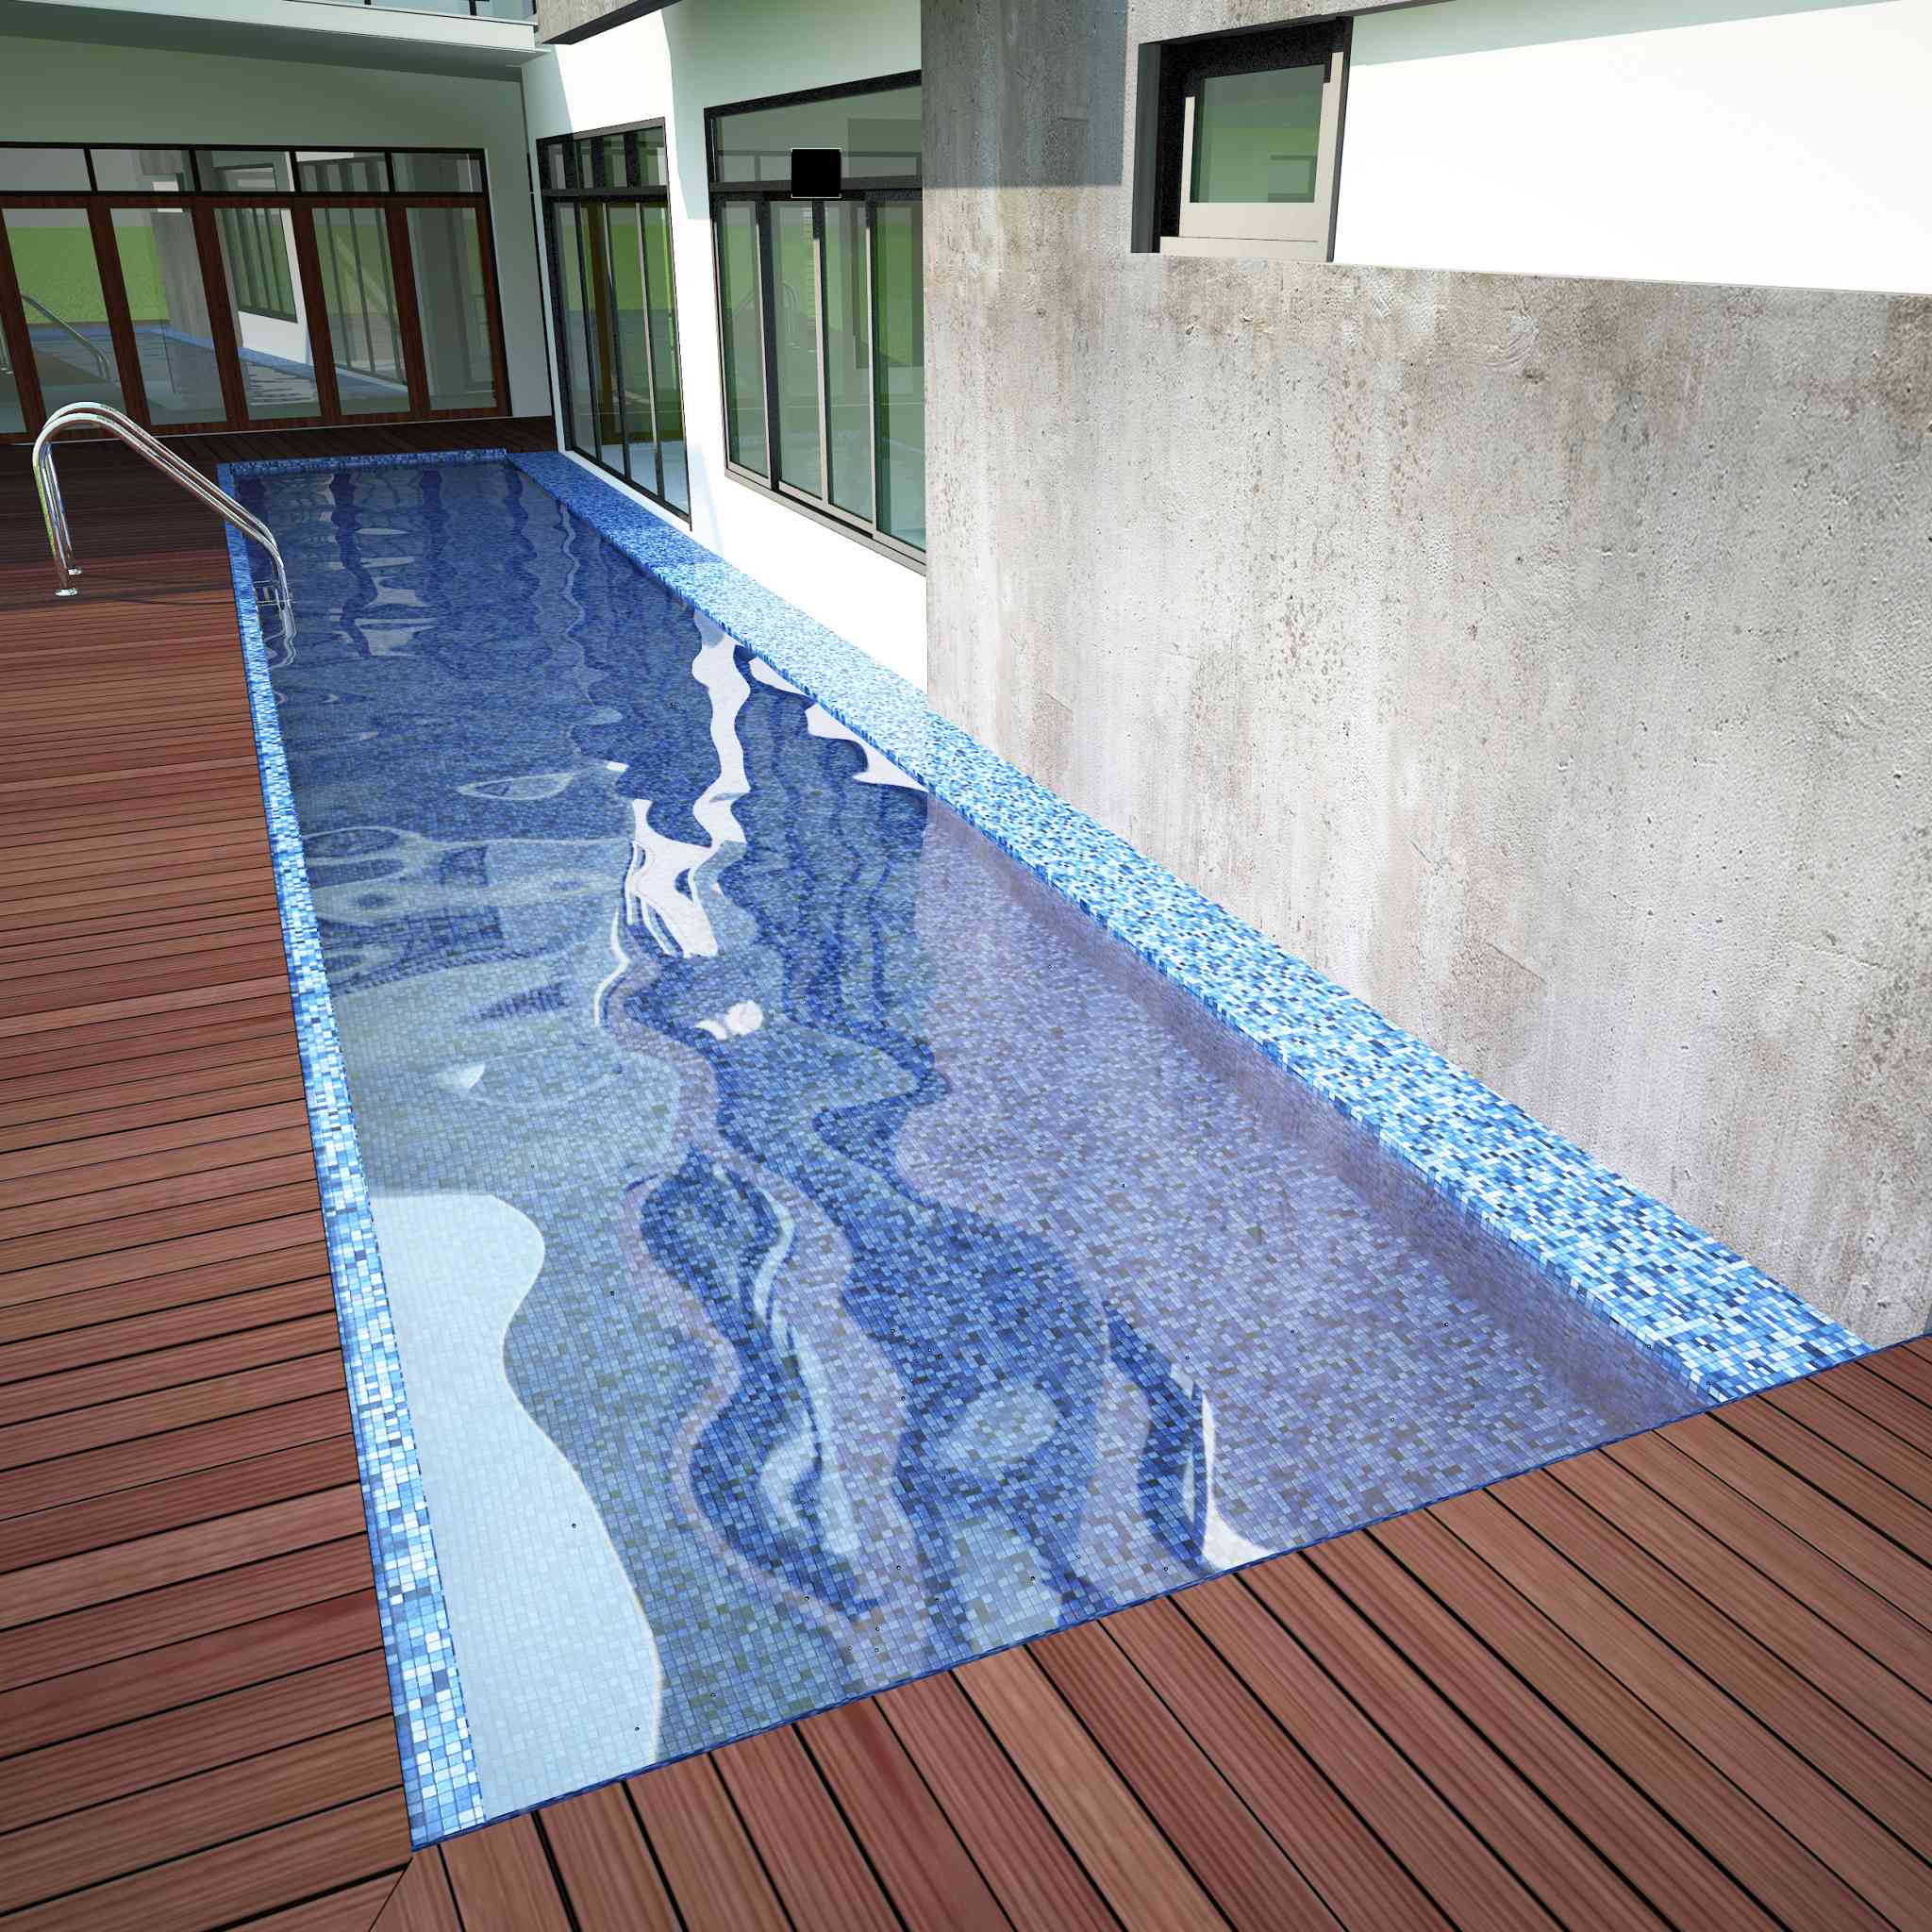 What You Need to Know About Indoor Pools